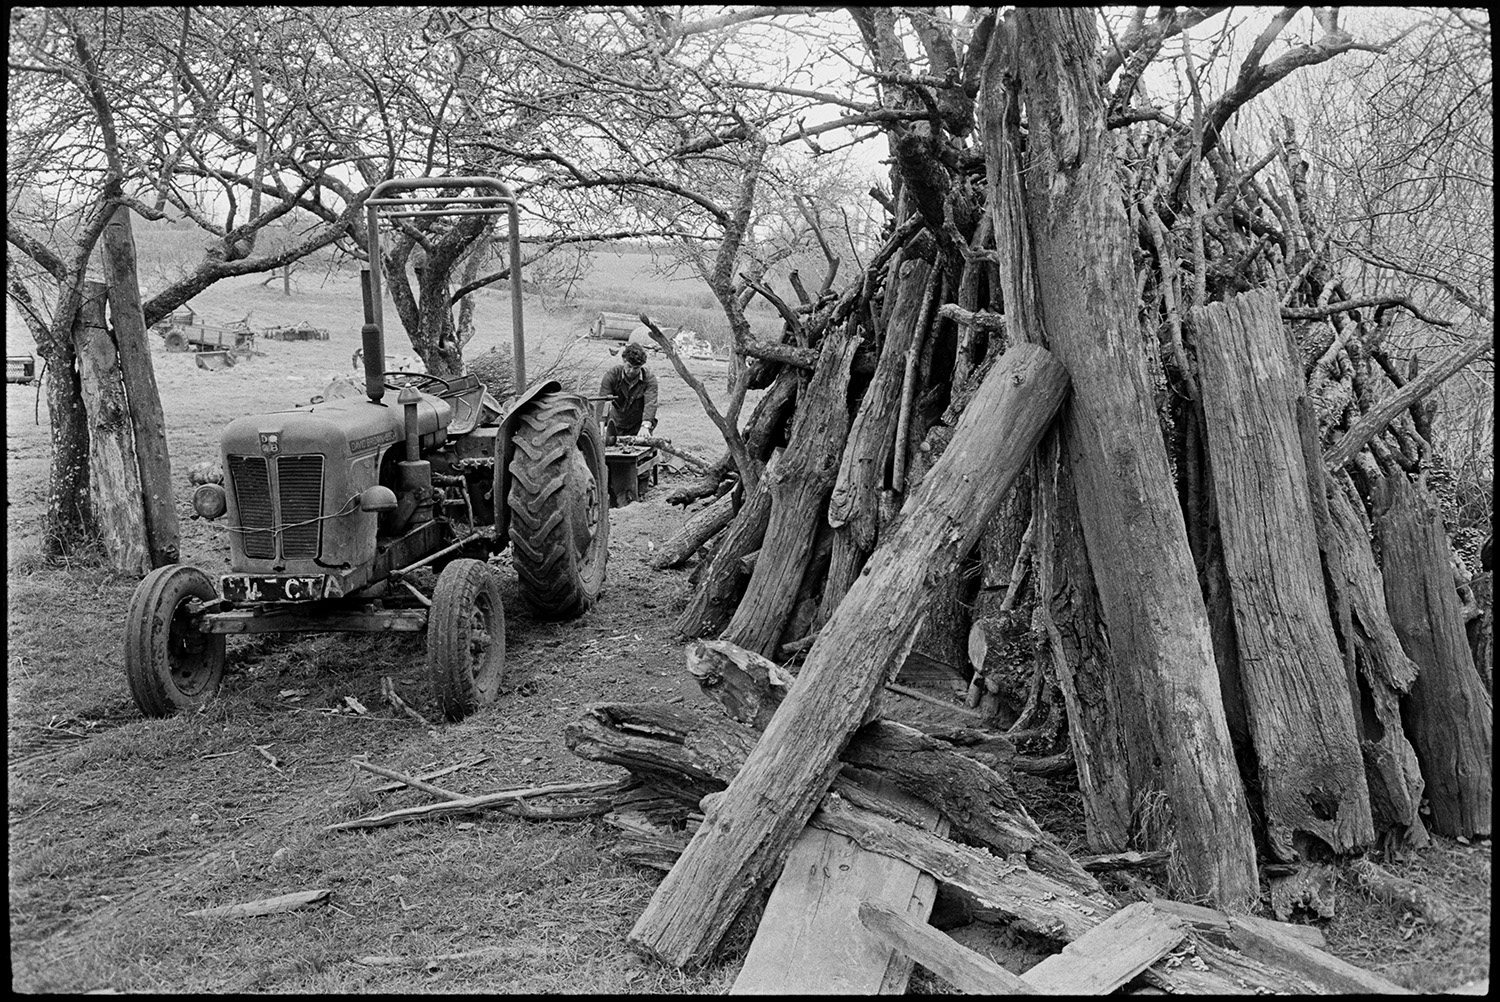 Farmer sawing logs on circular saw, woodpile in orchard. 
[Morley King sawing logs on a circular saw in an orchard at Middle Week, Iddesleigh. A tractor is parked in front of him, which he is using to drive the saw, and a woodpile is visible in the foreground.]